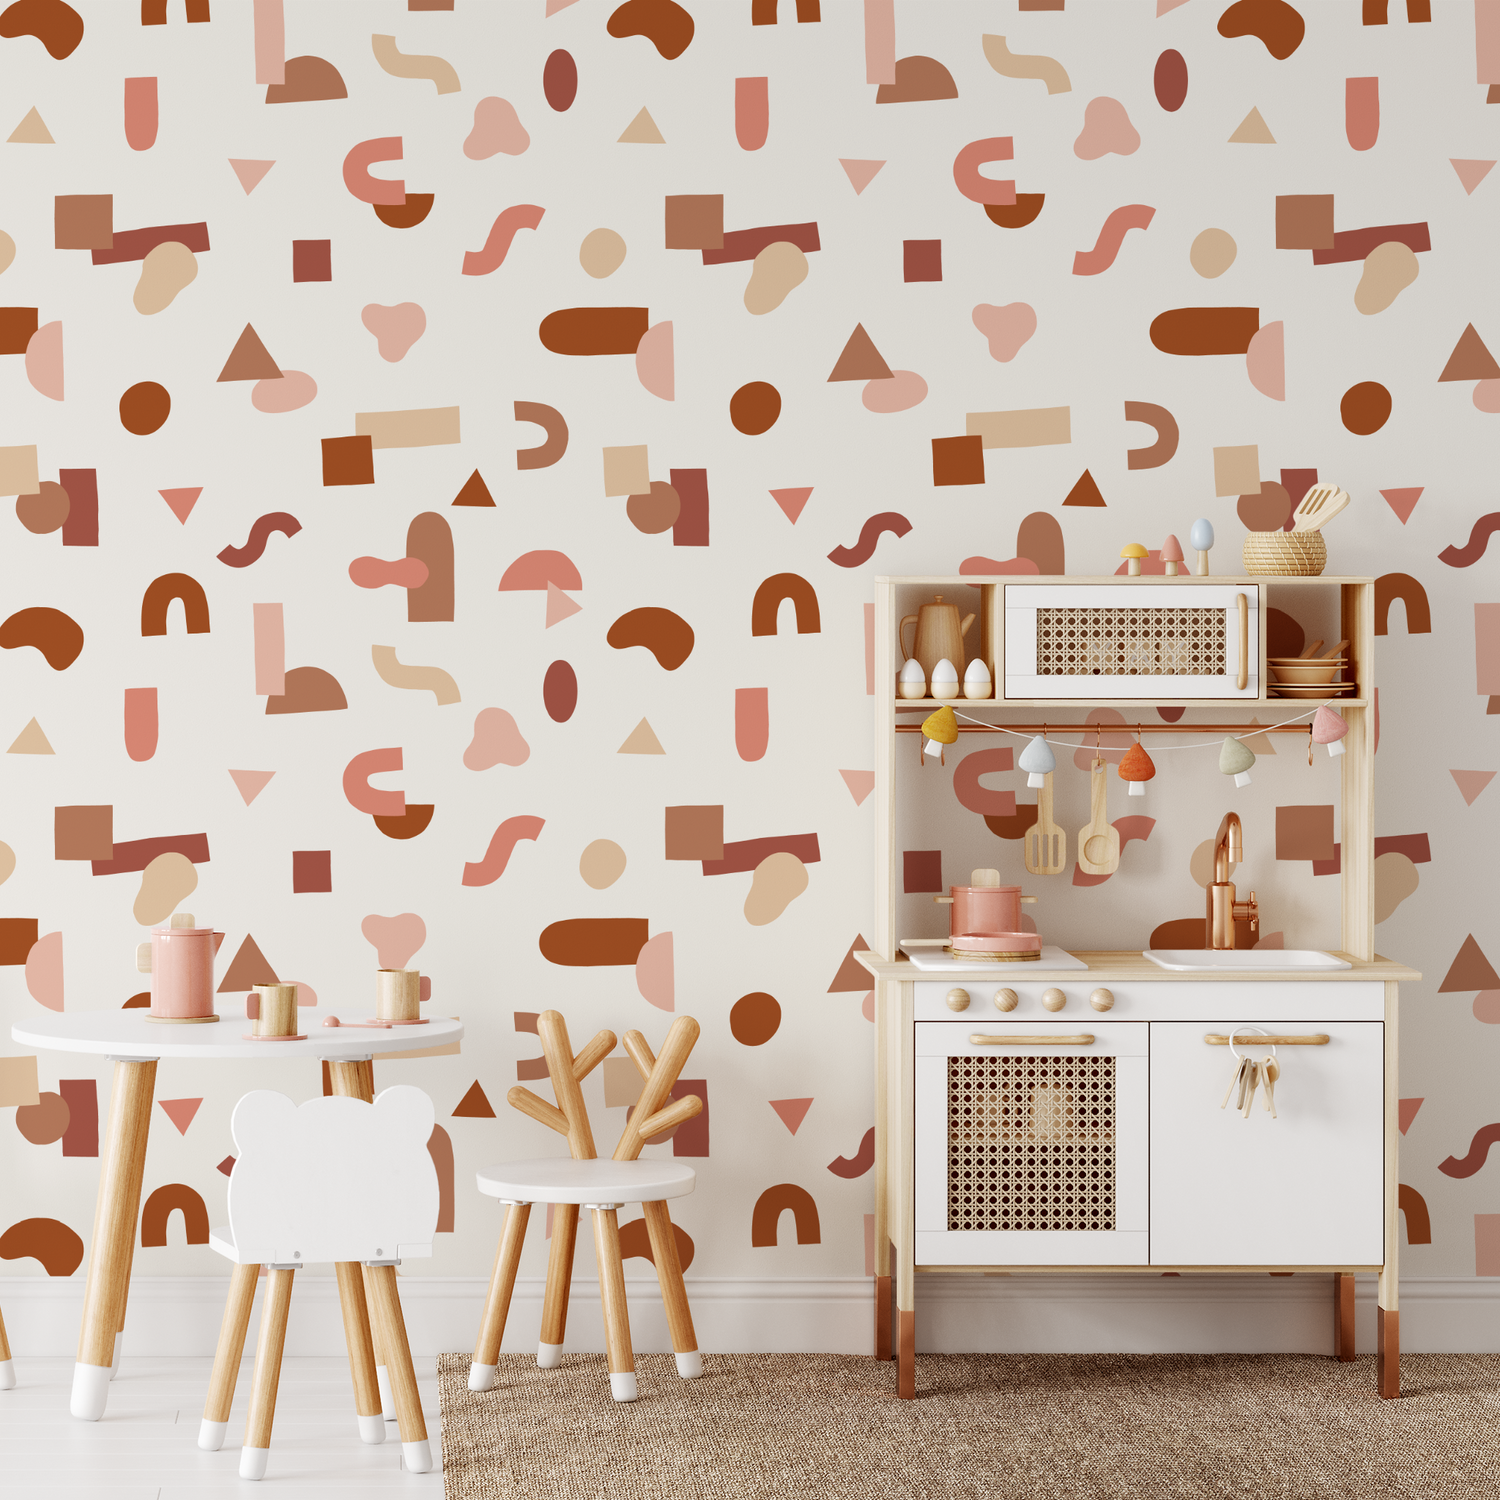 Playful Planets Wallpaper in Warm Tones on Navy  I Love Wallpaper